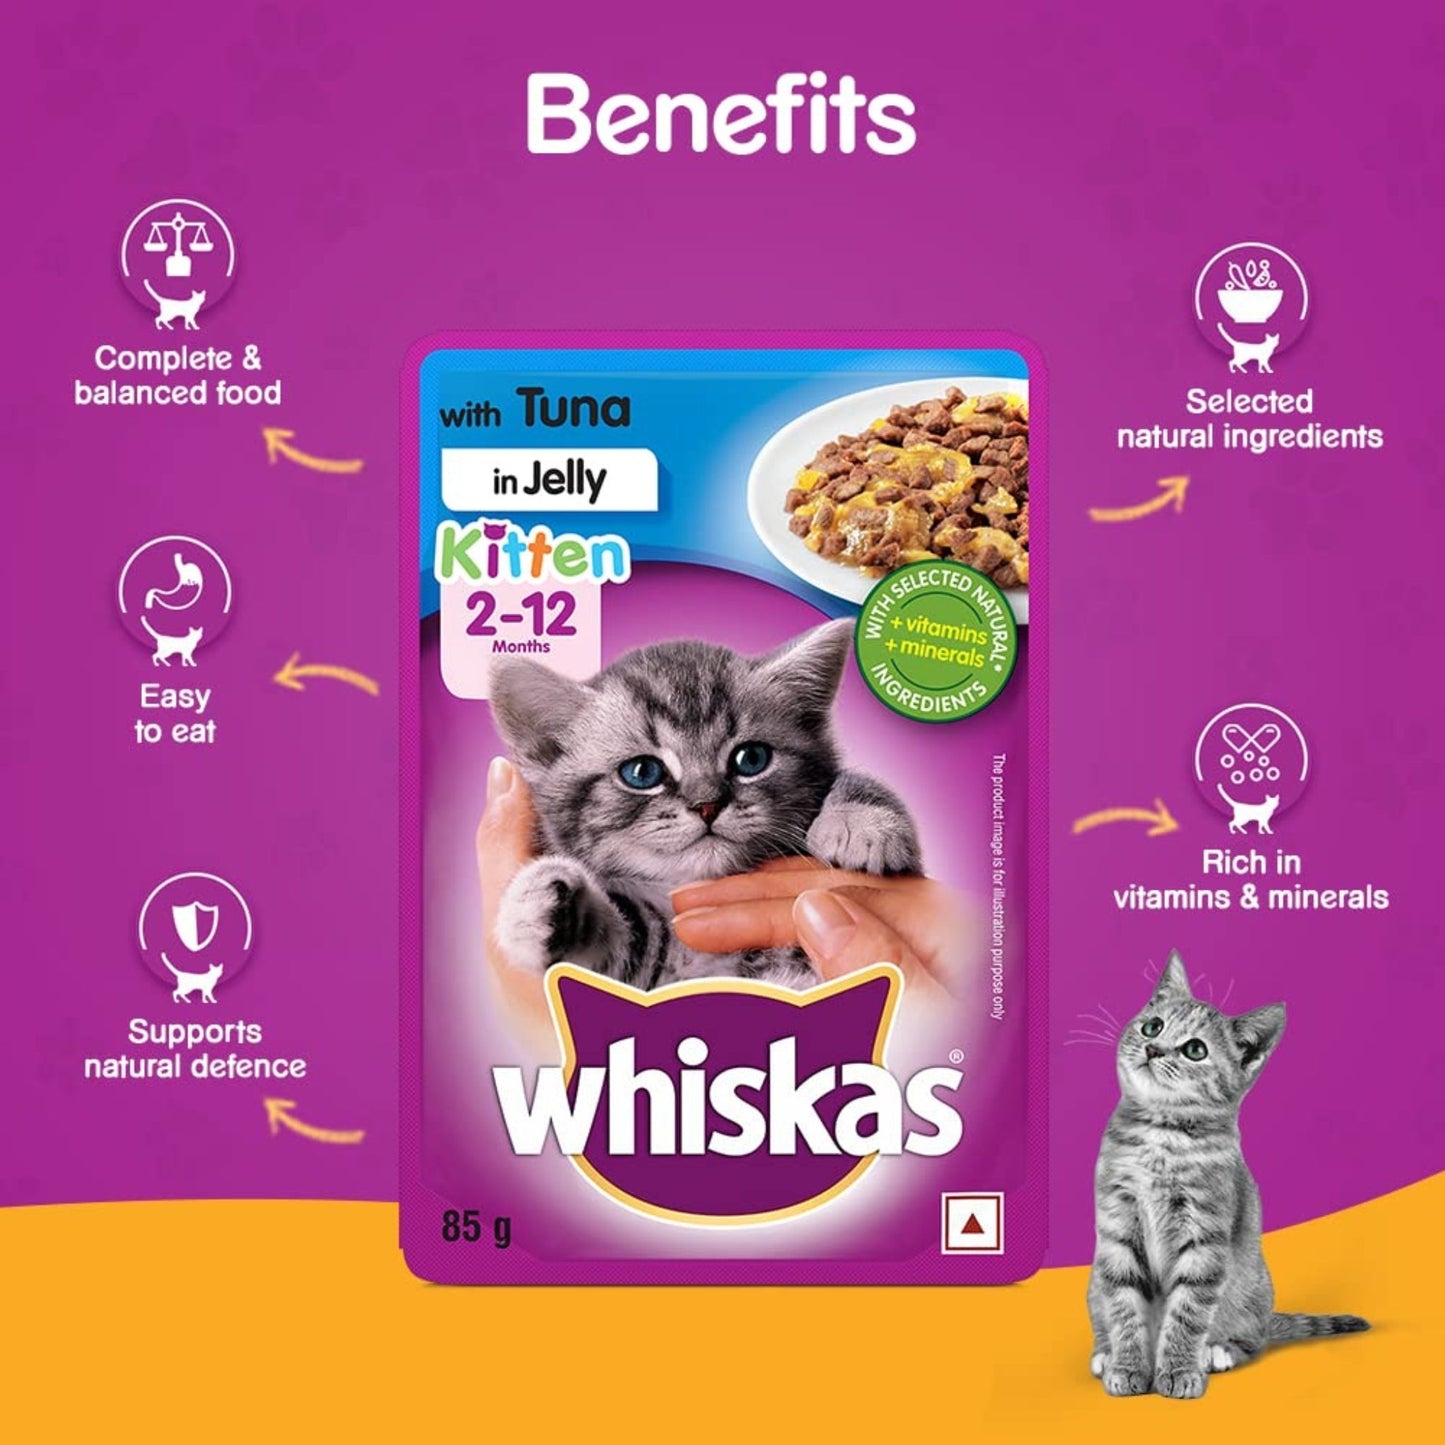 Whiskas Tuna in Jelly Wet Food for Kittens - 85gm, Pack of 18